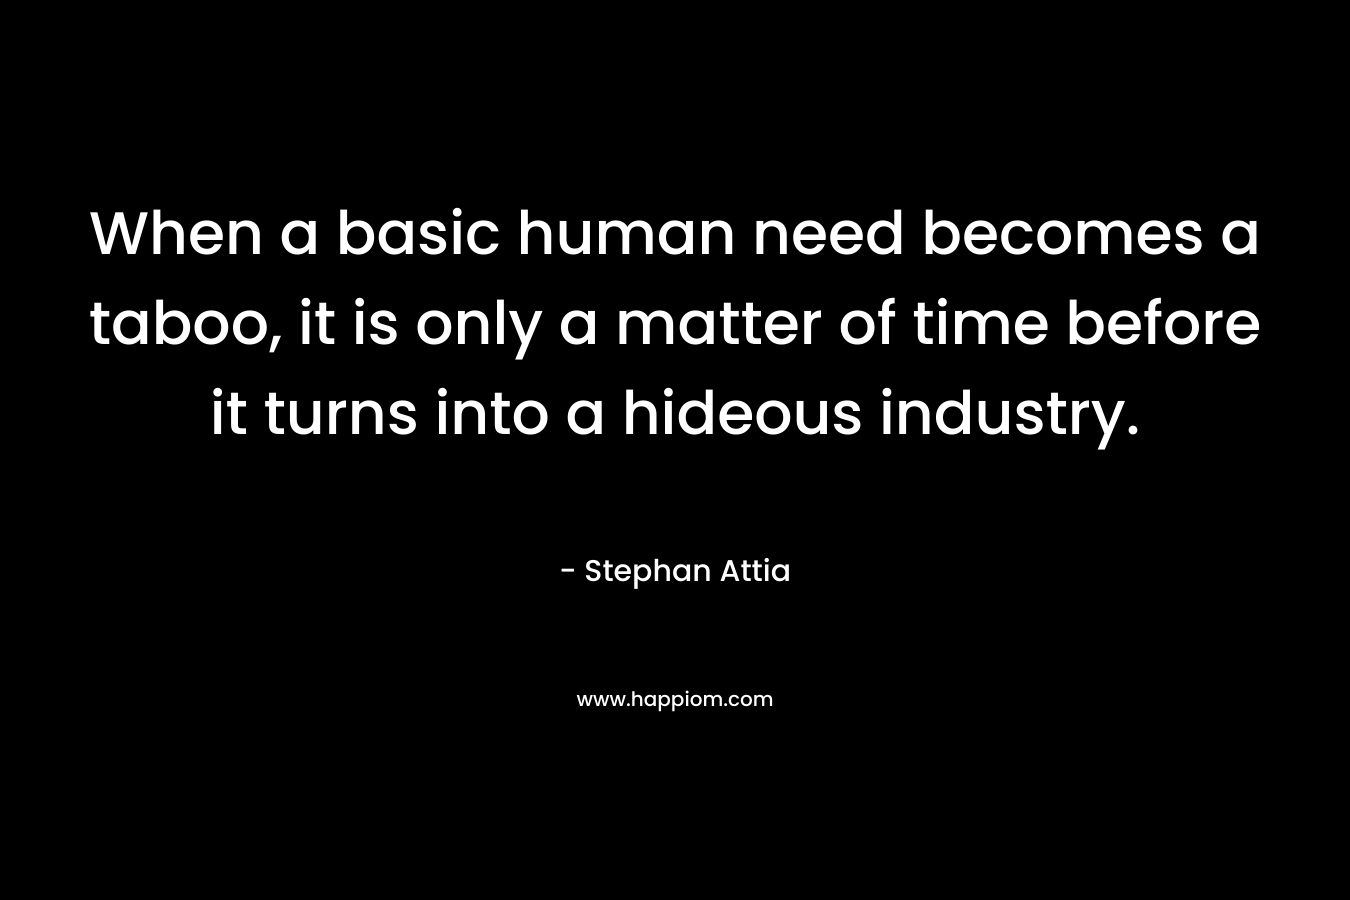 When a basic human need becomes a taboo, it is only a matter of time before it turns into a hideous industry. – Stephan Attia